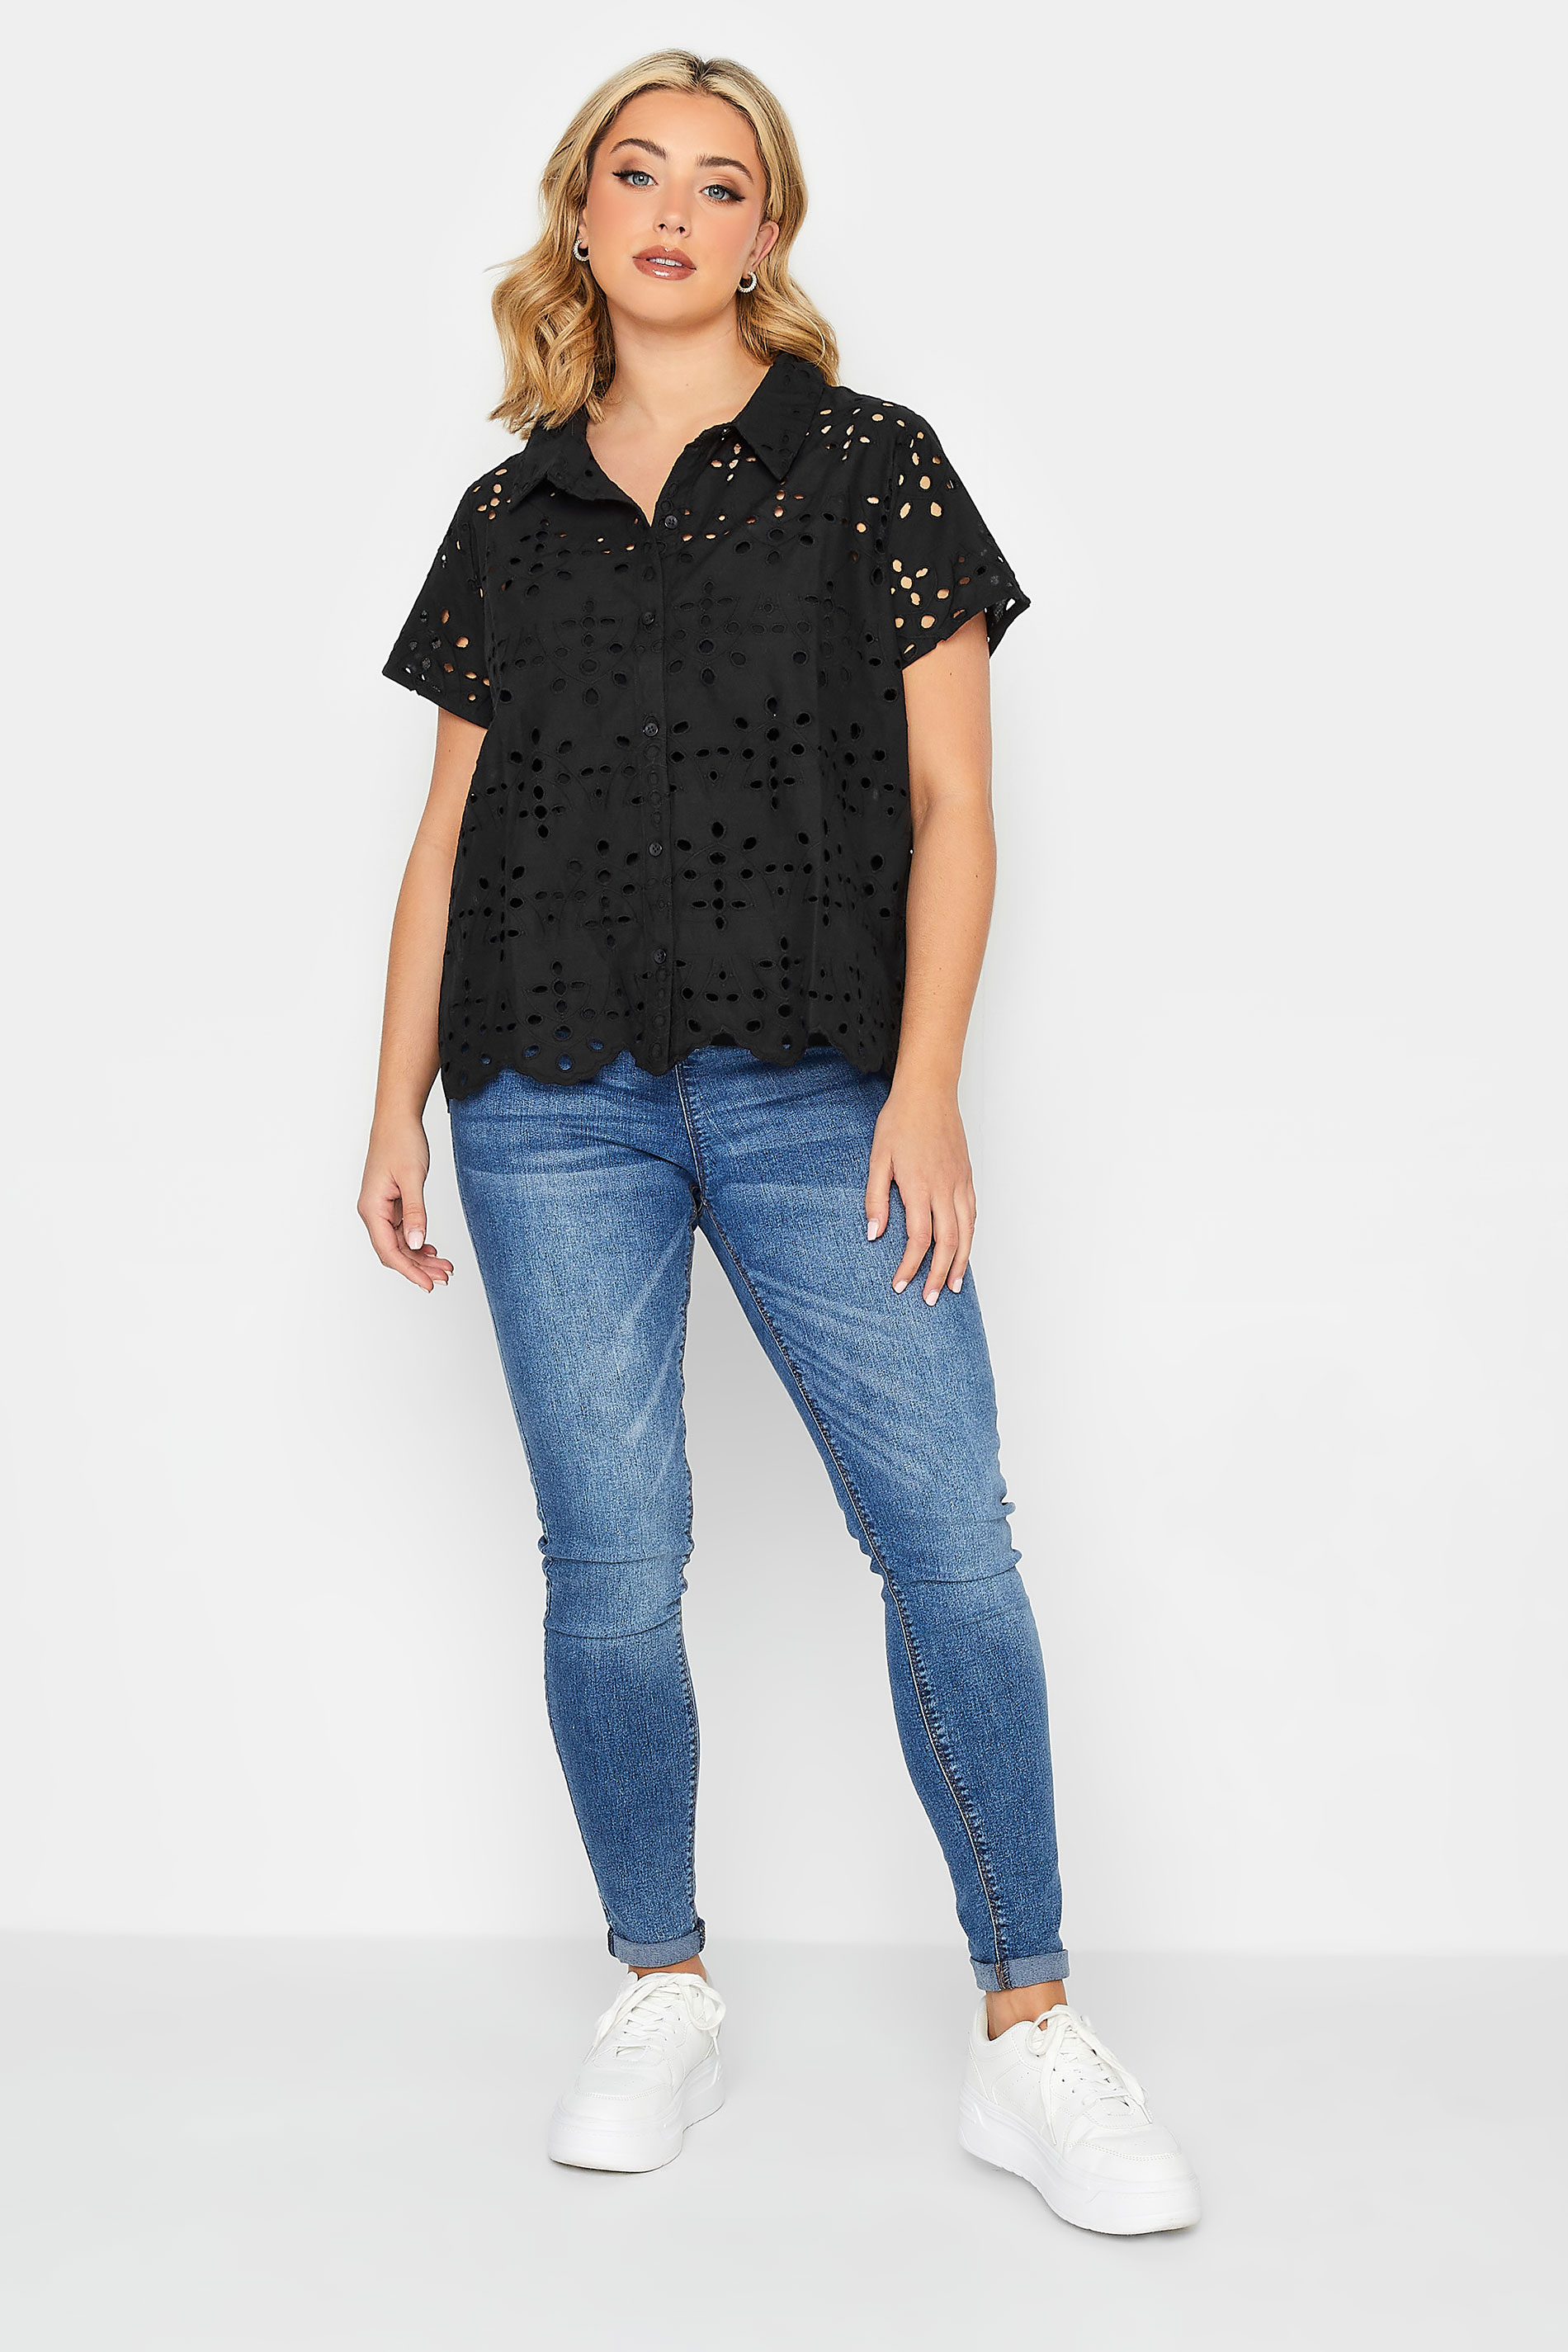 YOURS PETITE Plus Size Black Broderie Anglaise Short Sleeve Shirt | Yours Clothing 2